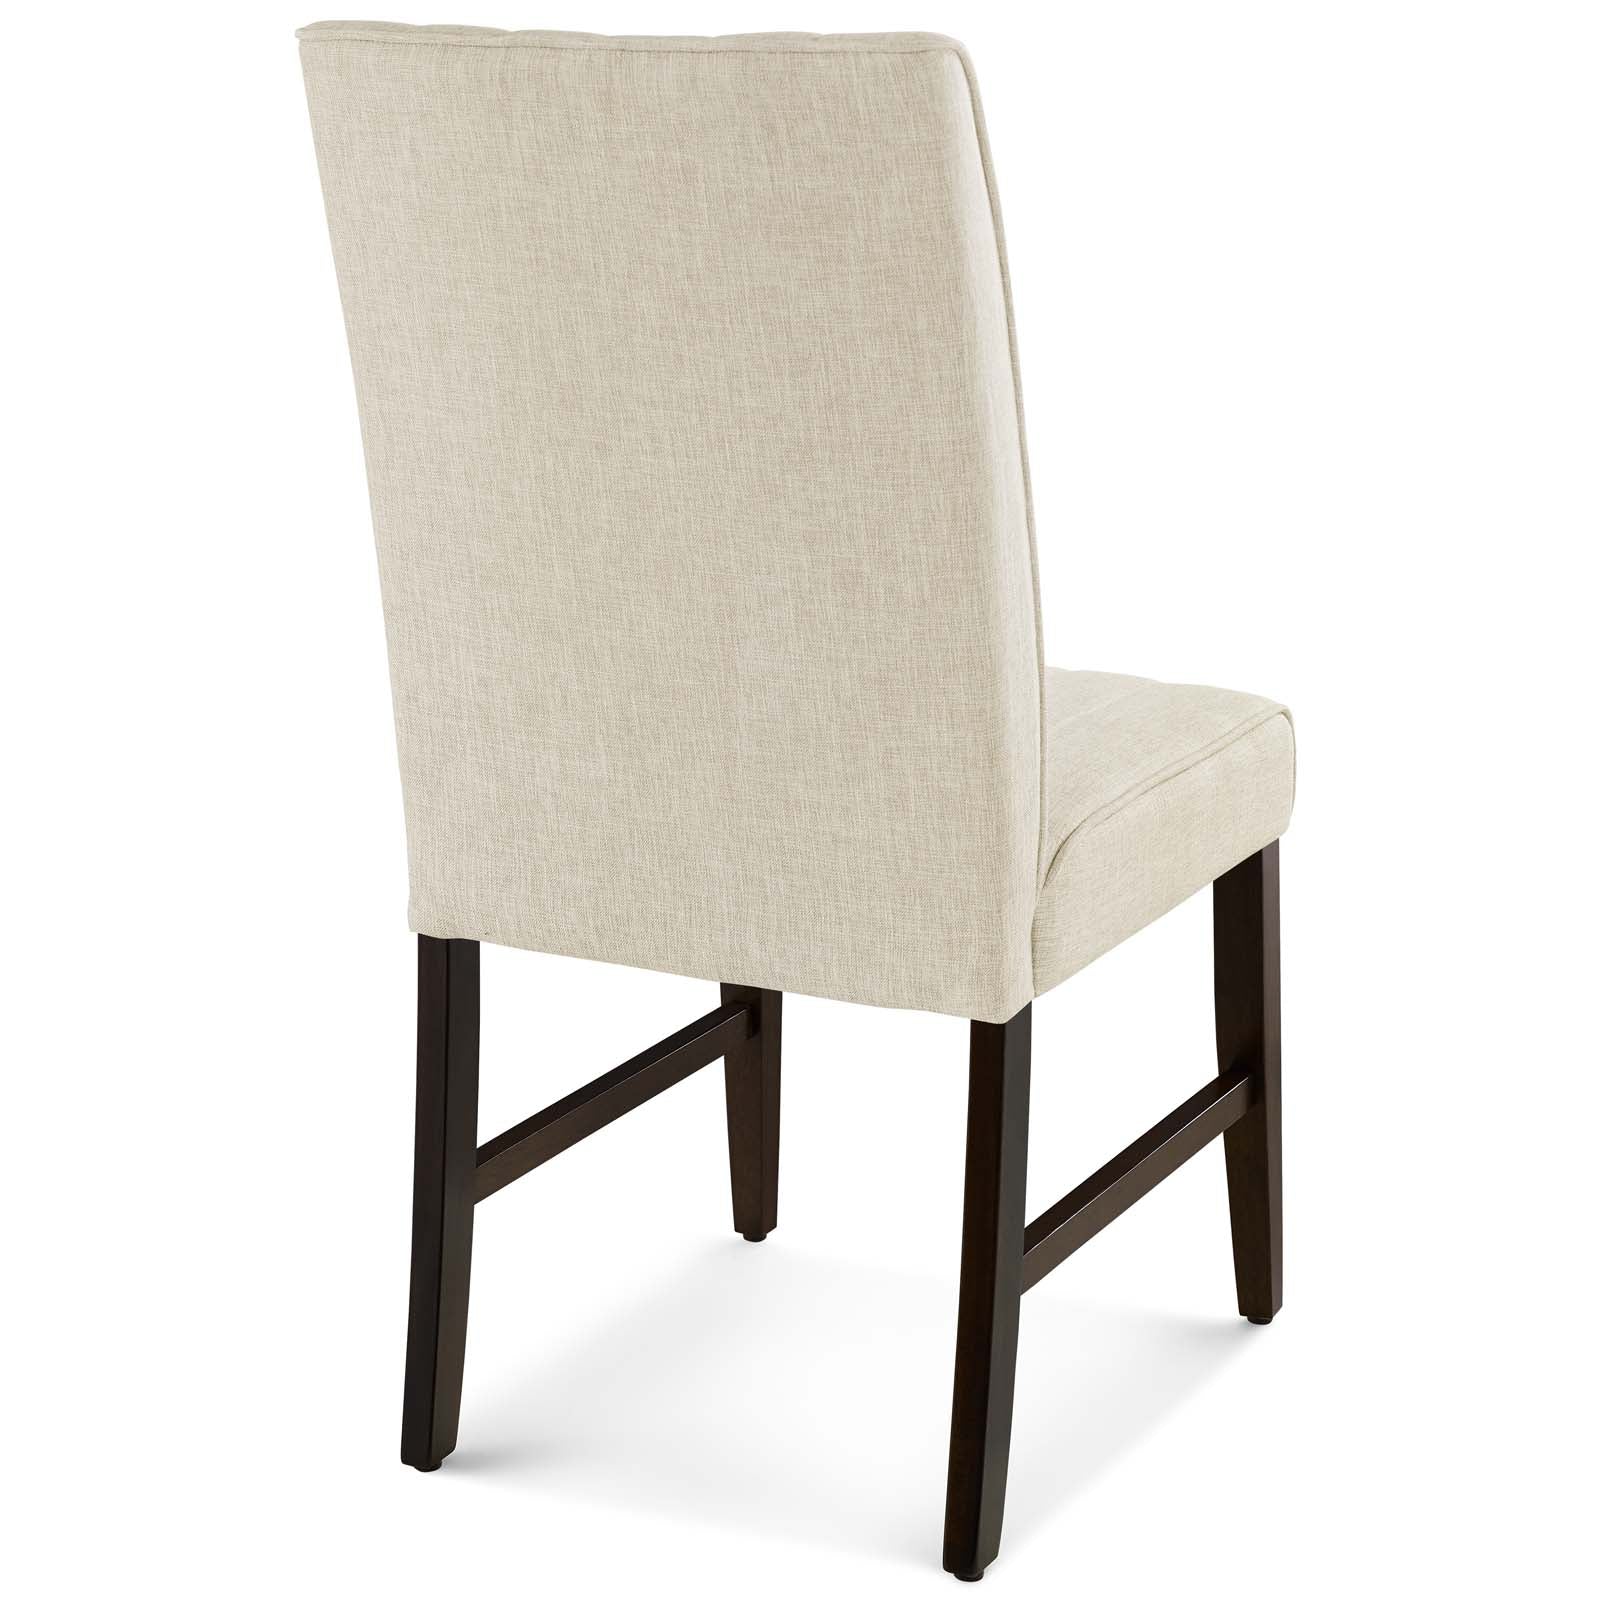 Modway Dining Chairs - Motivate Channel Tufted Upholstered Fabric Dining Chair Set of 2 Beige